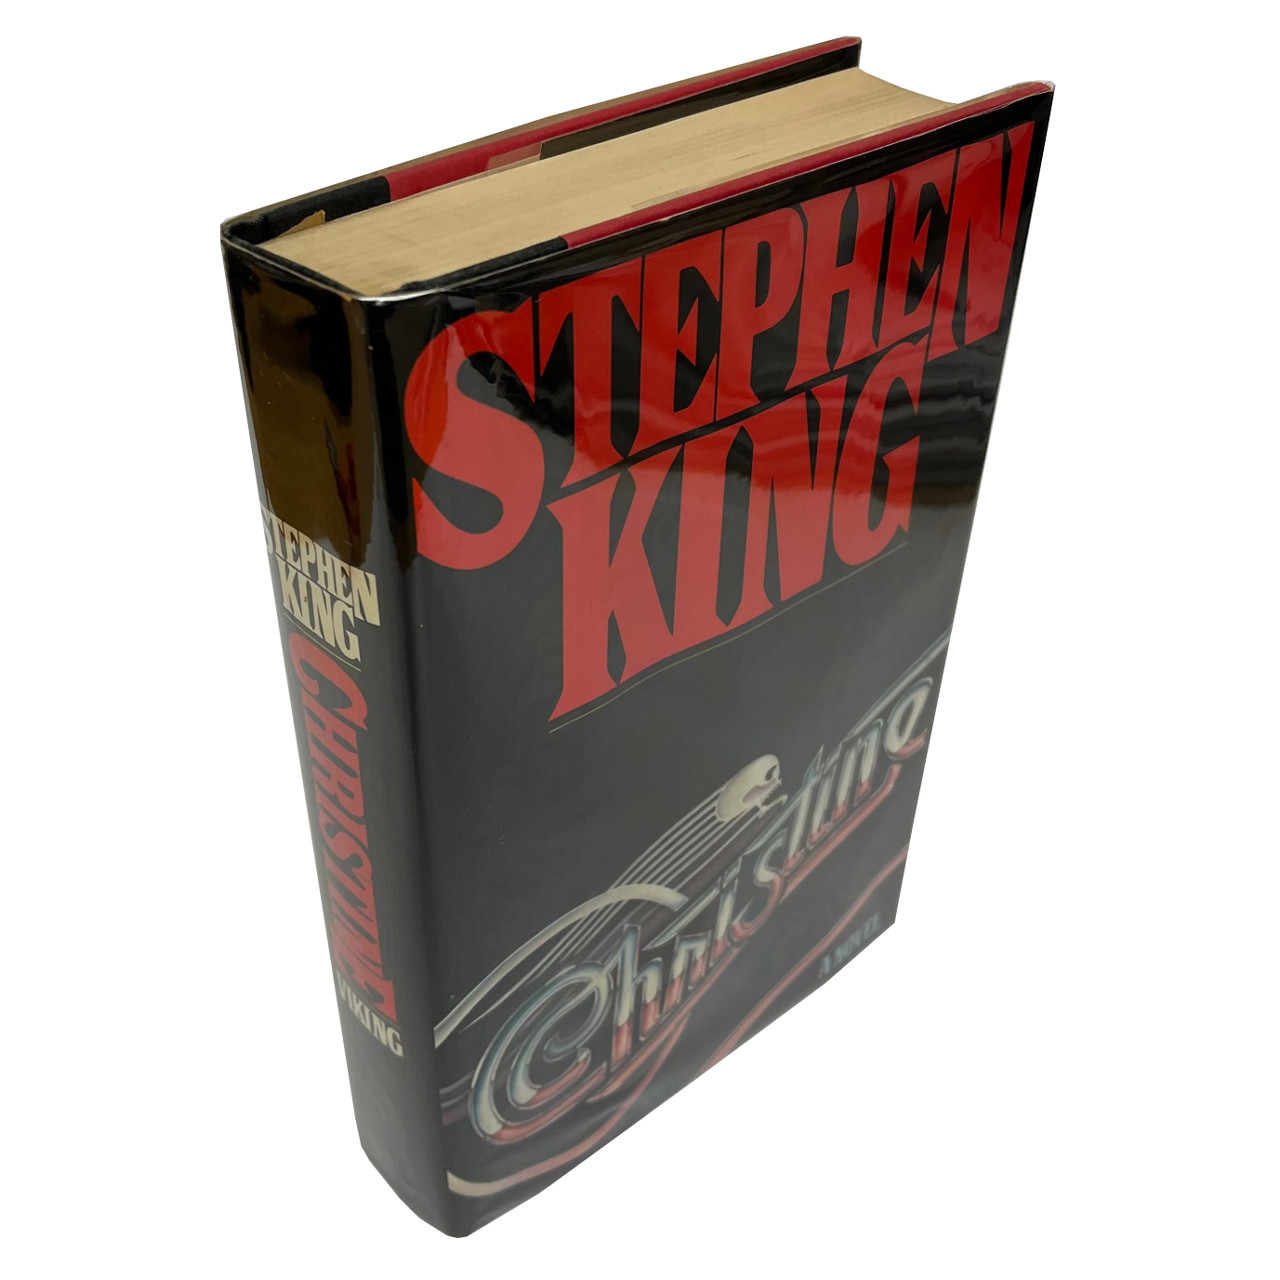 Stephen King "Christine" Signed First Edition, First Printing (Date of Publication) Slipcased W/COA